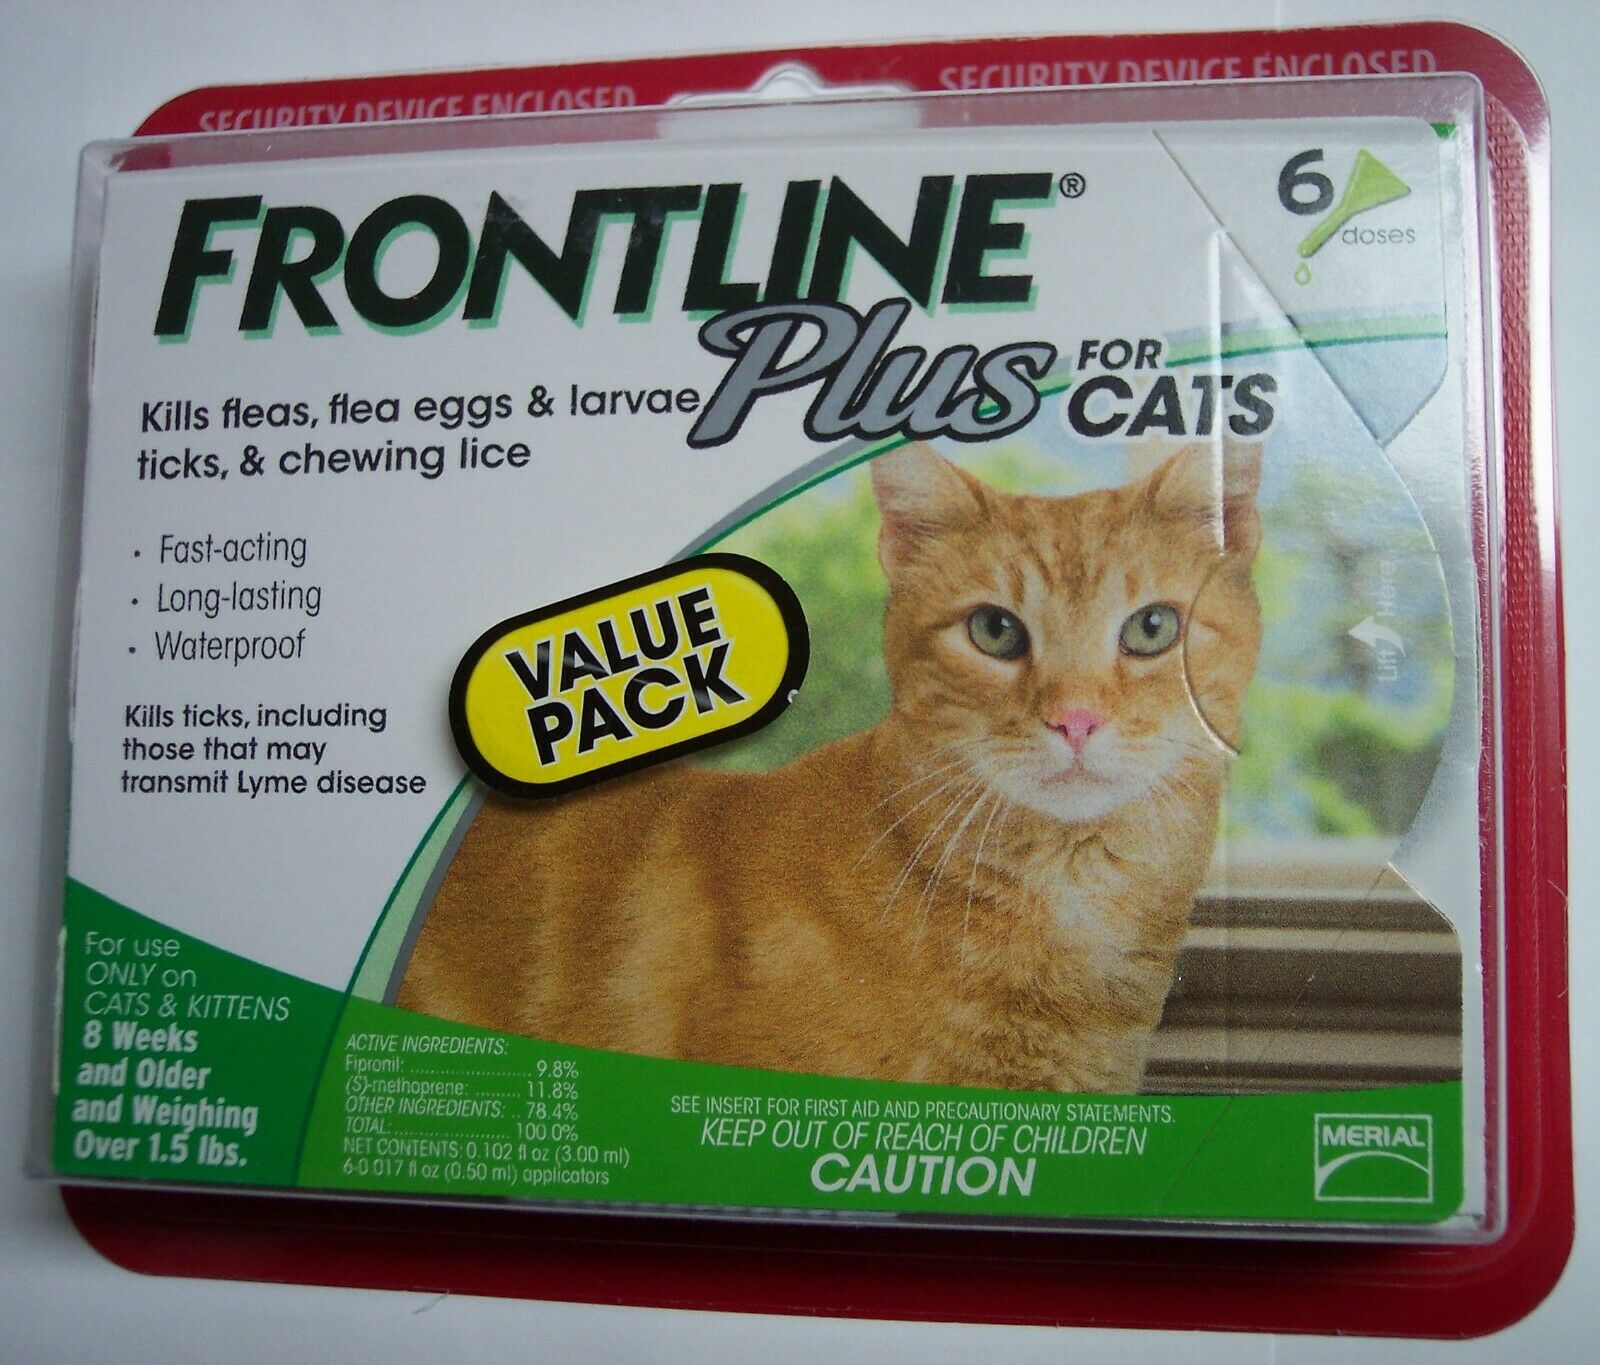 Frontline Plus Flea & Tick Control For Cats, Kittens Over 1.5 Lbs (6 Dose Box)